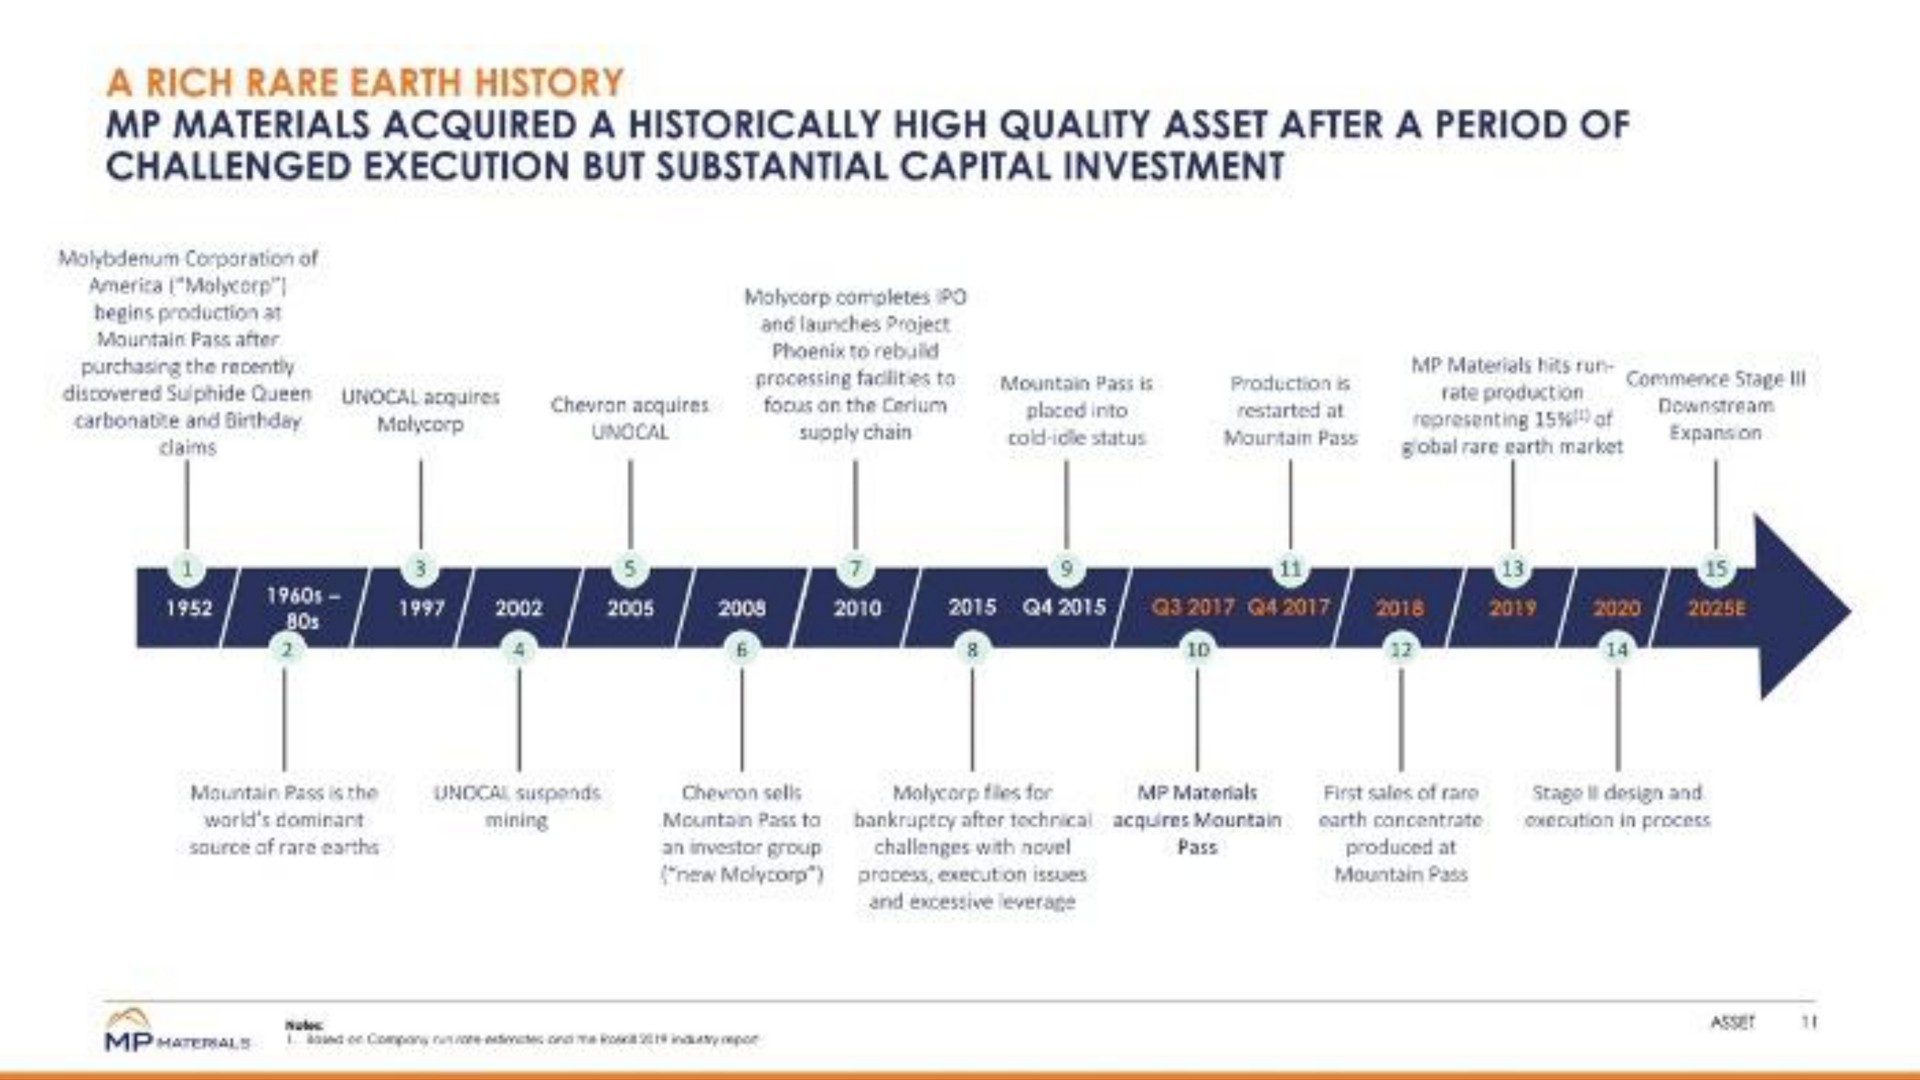 materials acquired a historically high quality asset after a period of challenged execution but substantial capital investment | MP Materials